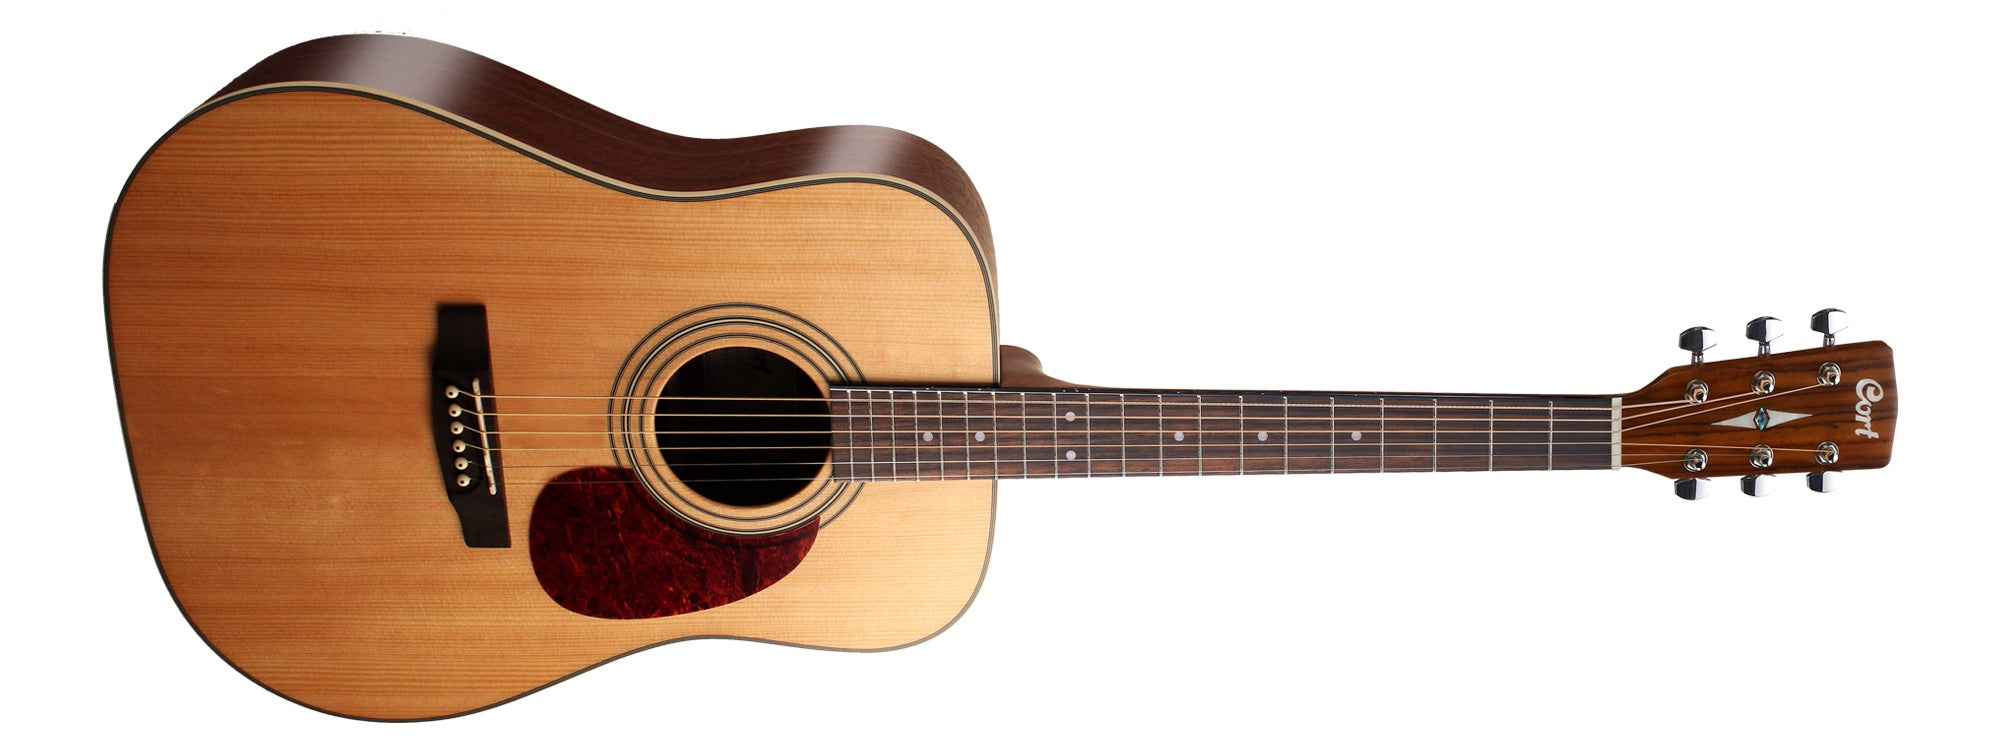 Cort Earth 70 Open Pore, Acoustic Guitar for sale at Richards Guitars.